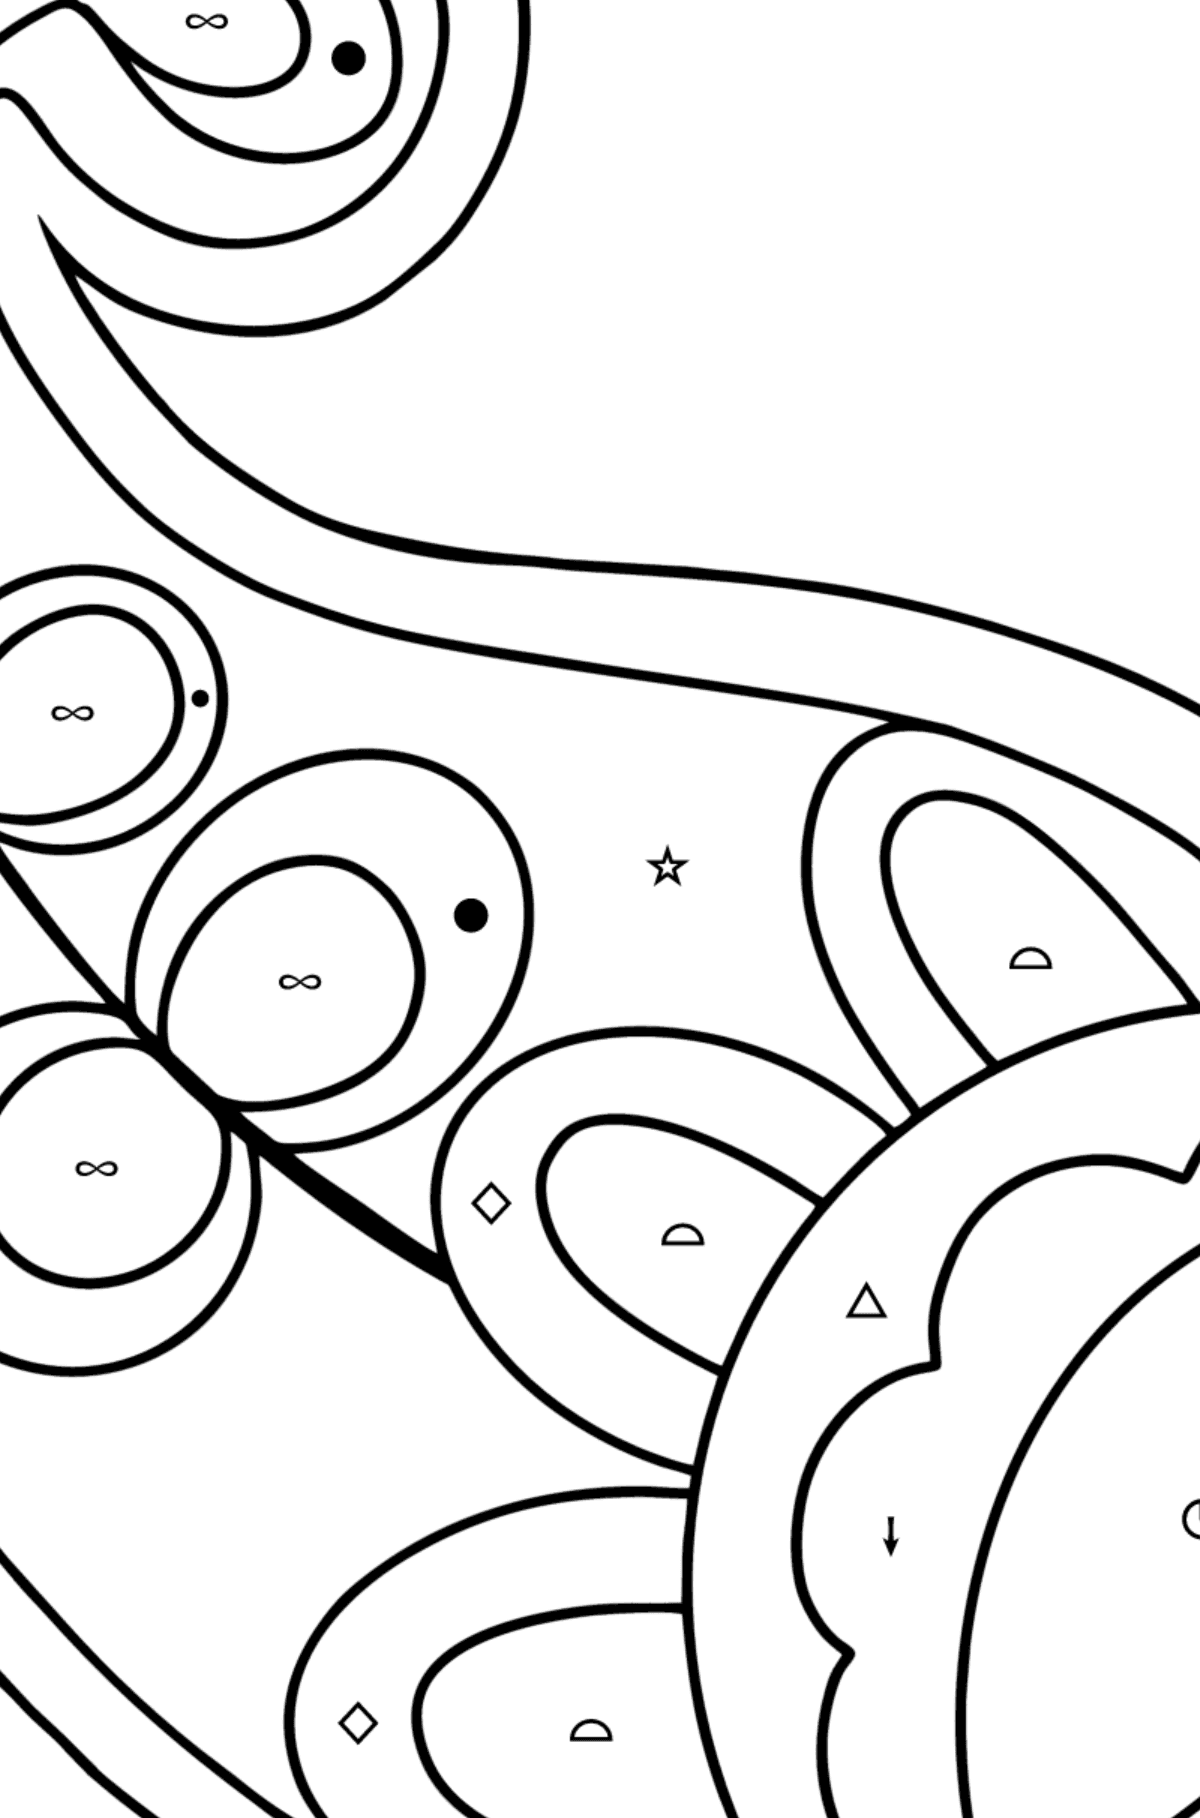 Paisley coloring page for Kids - Coloring by Symbols and Geometric Shapes for Kids